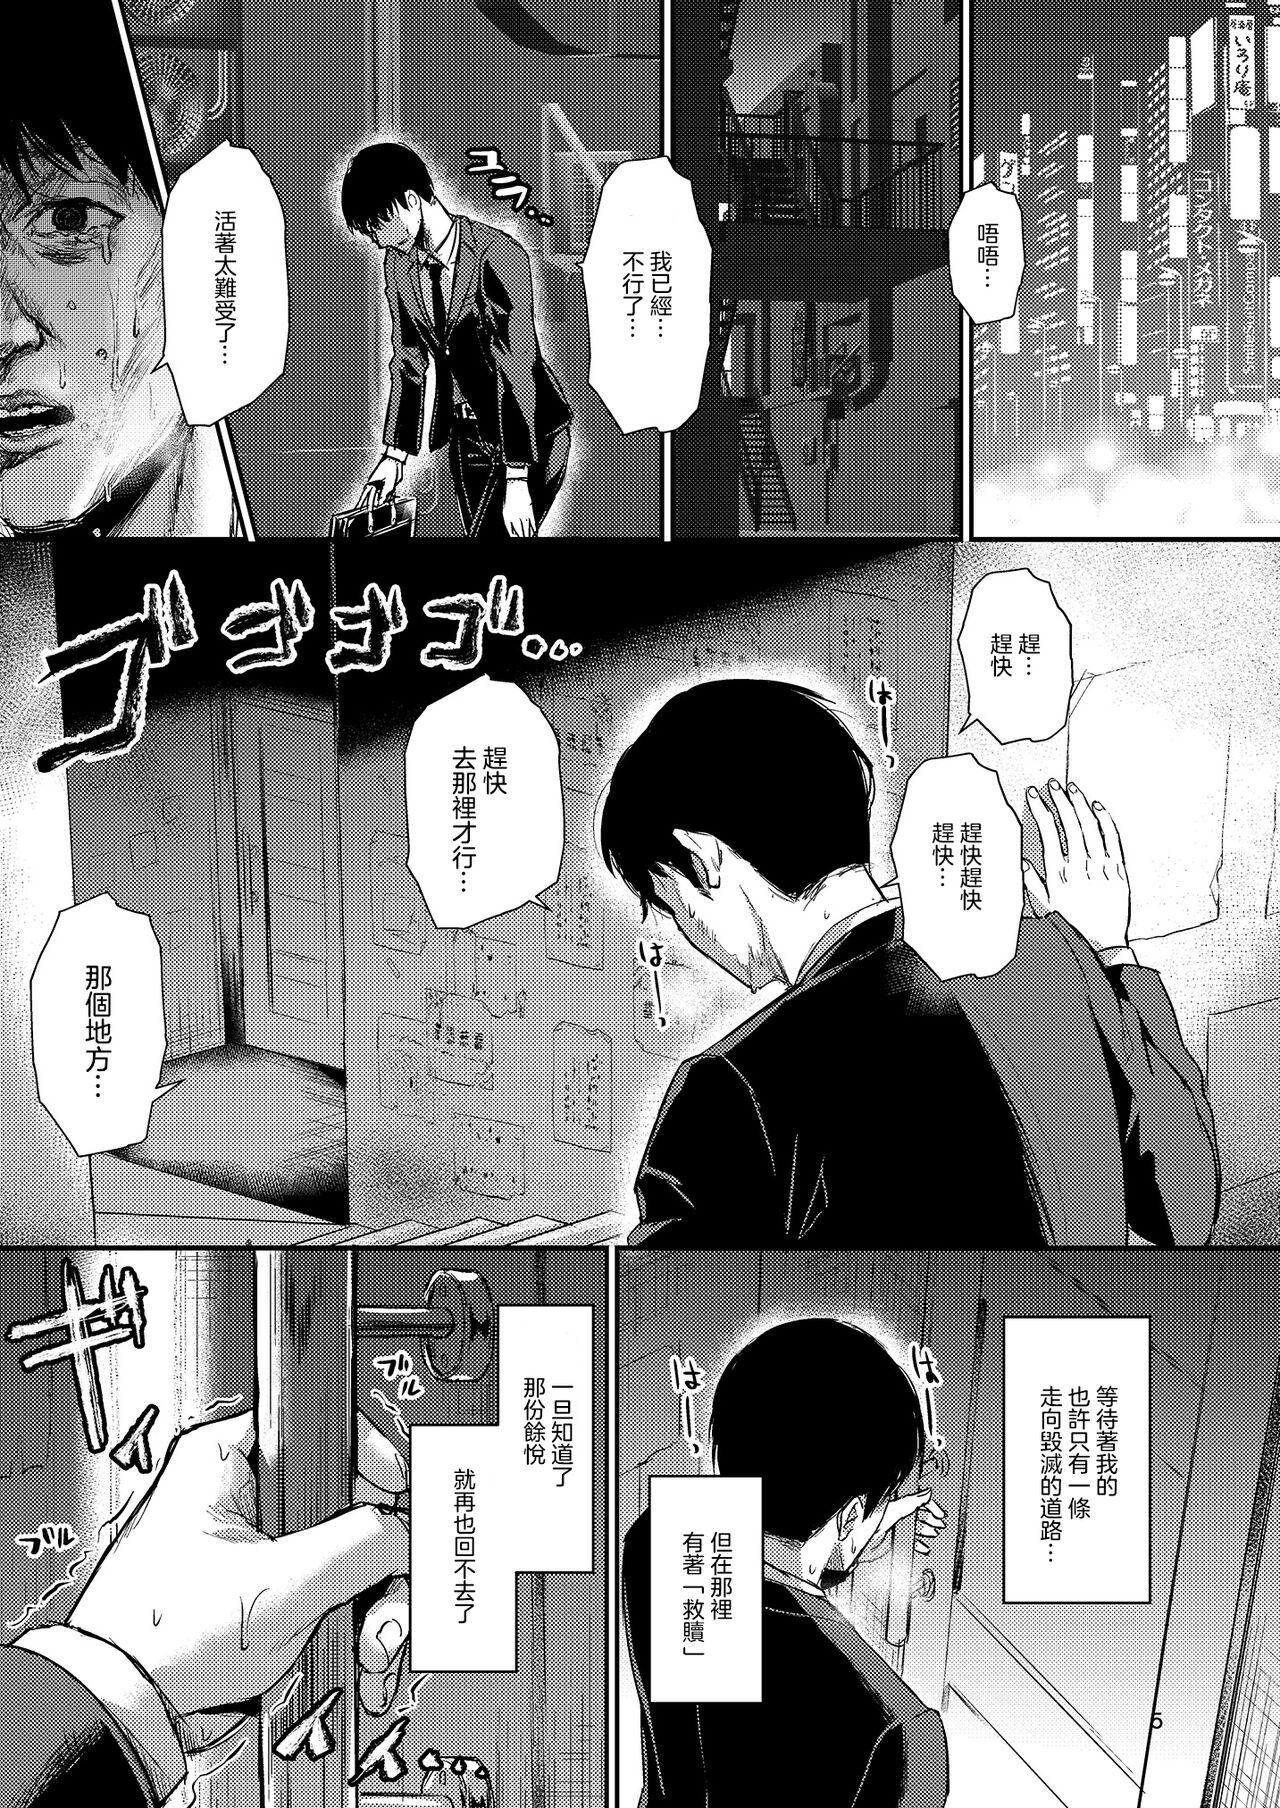 Bear Homehome Home e Youkoso! - Welcome to Home Home Home! | 歡迎來到誇誇屋！ Blowjobs - Page 6